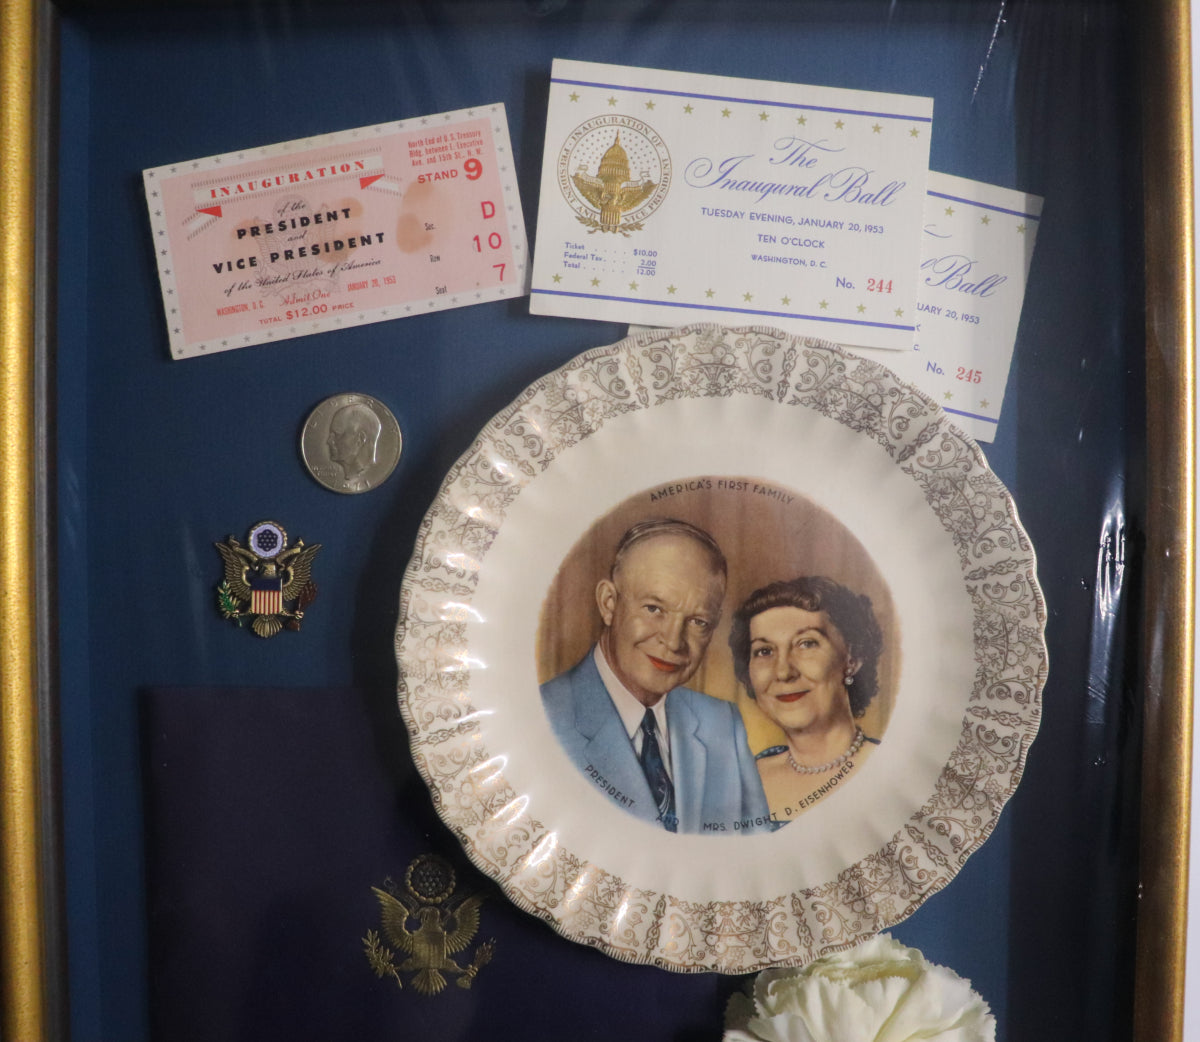 The President Dwight D. Eisenhower Collection